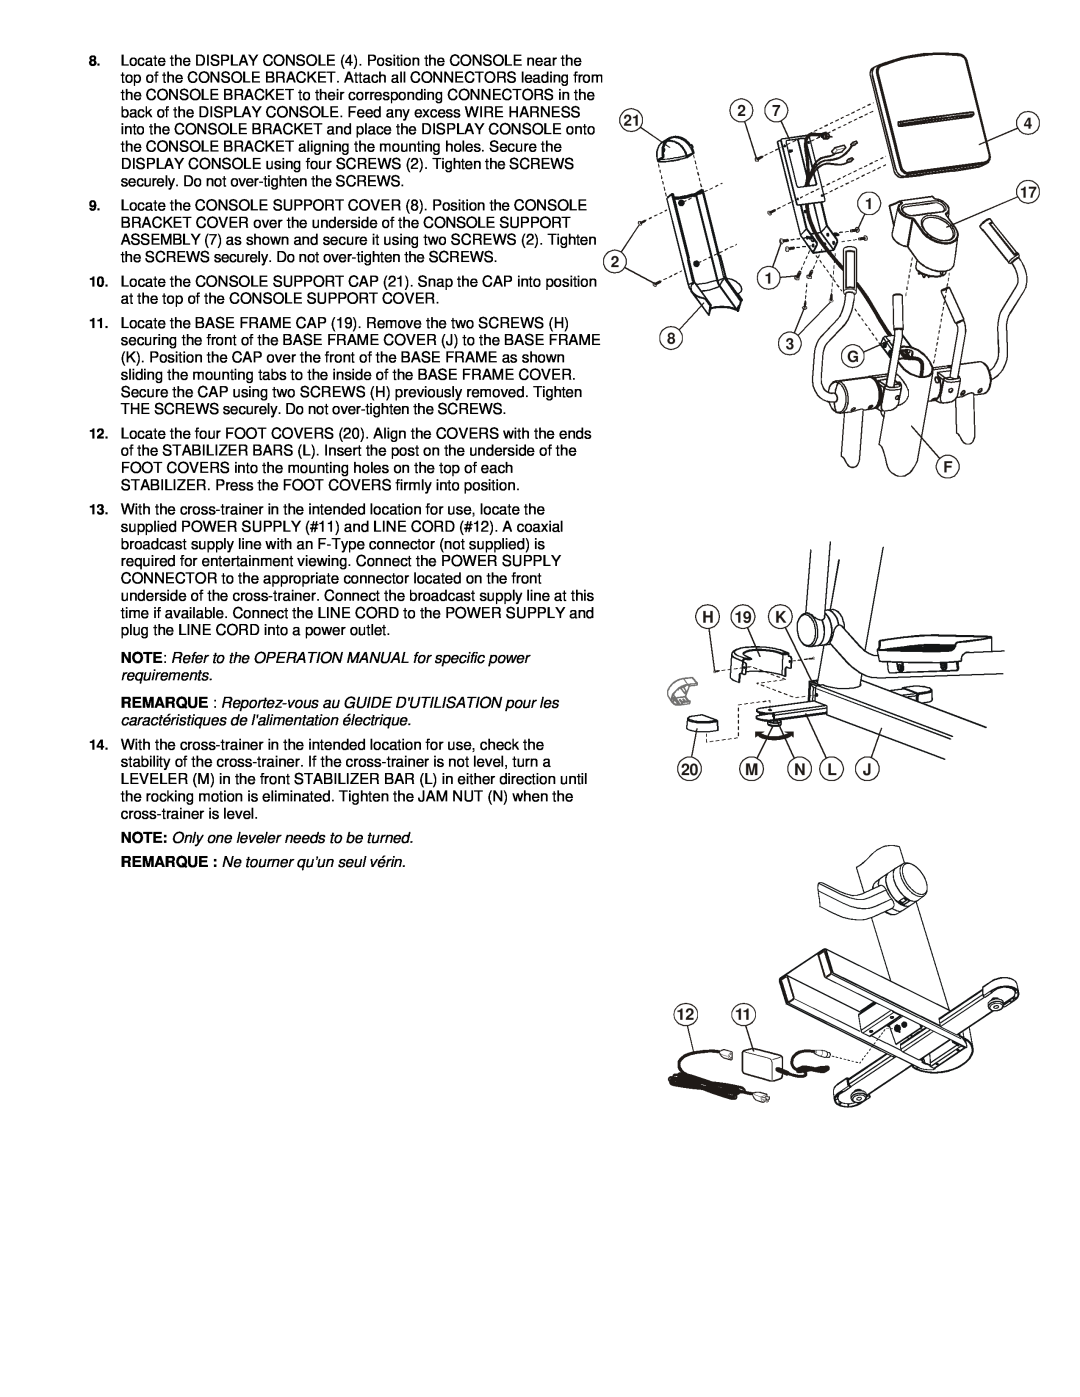 Life Fitness 95Xe manual G F H 19 K 20 M N L J, NOTE Refer to the OPERATION MANUAL for specific power requirements 